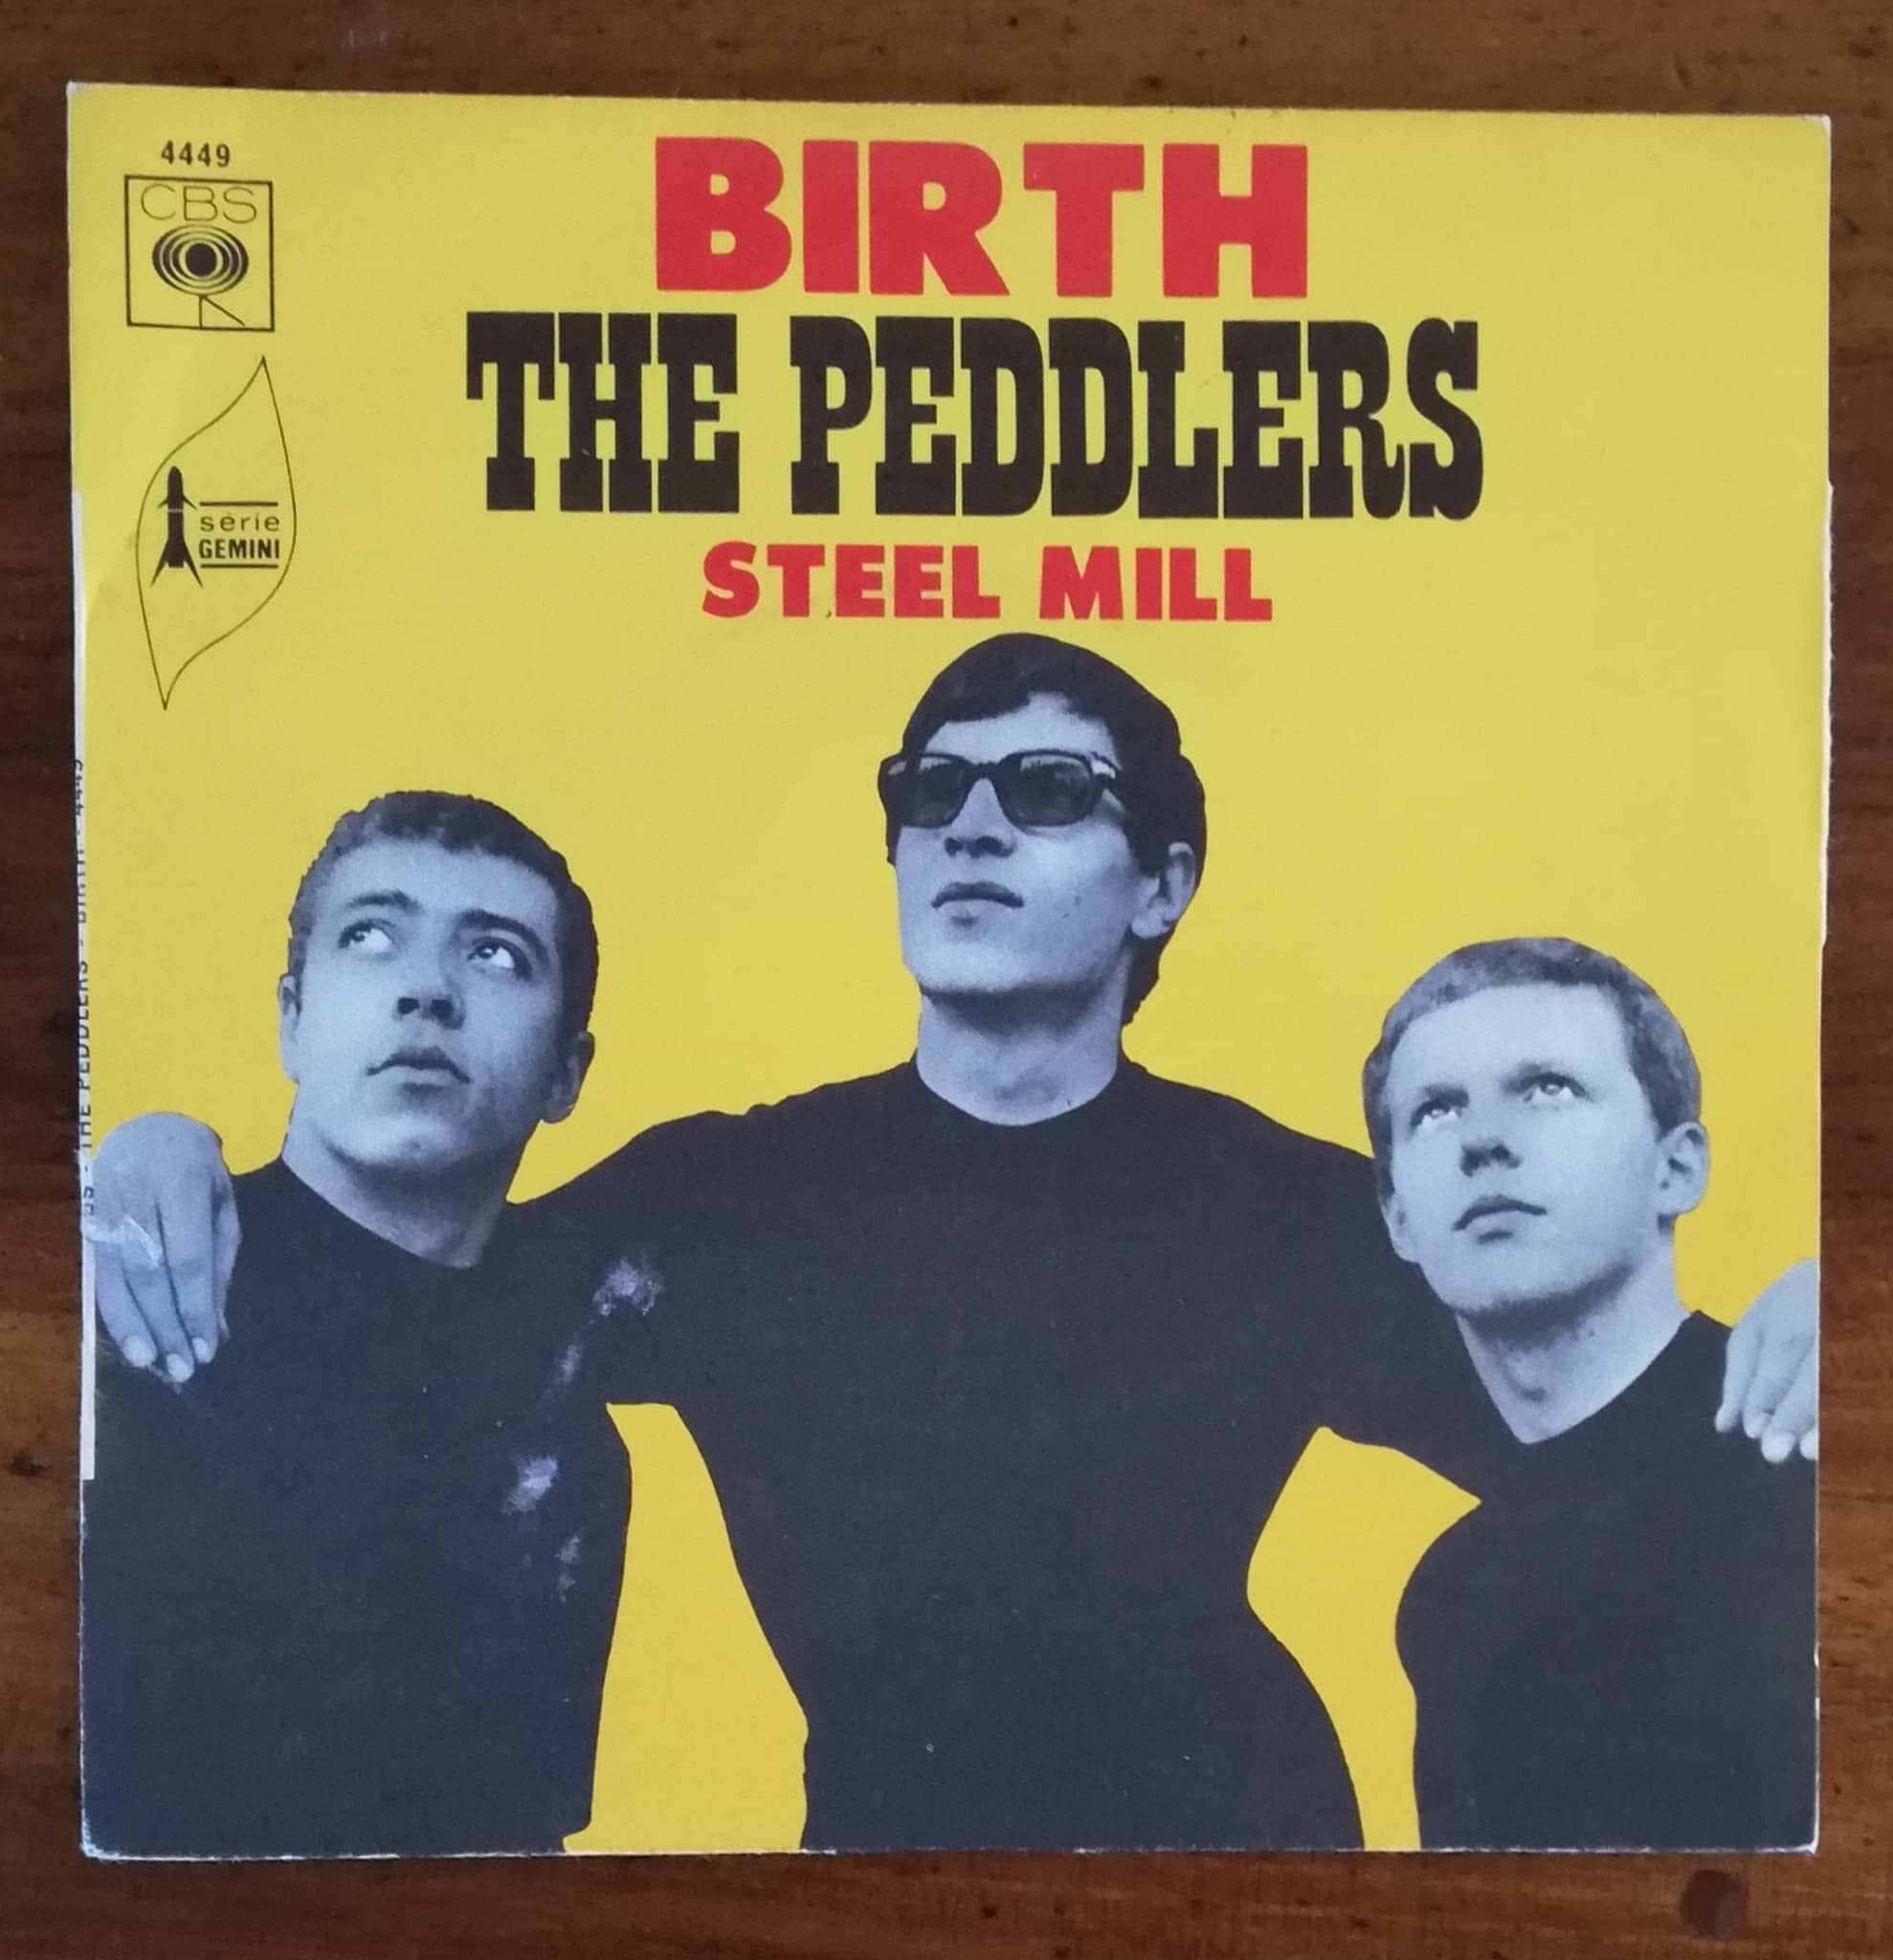 The Peddlers: Birth, 7" PS, France, 1969 - 10 €